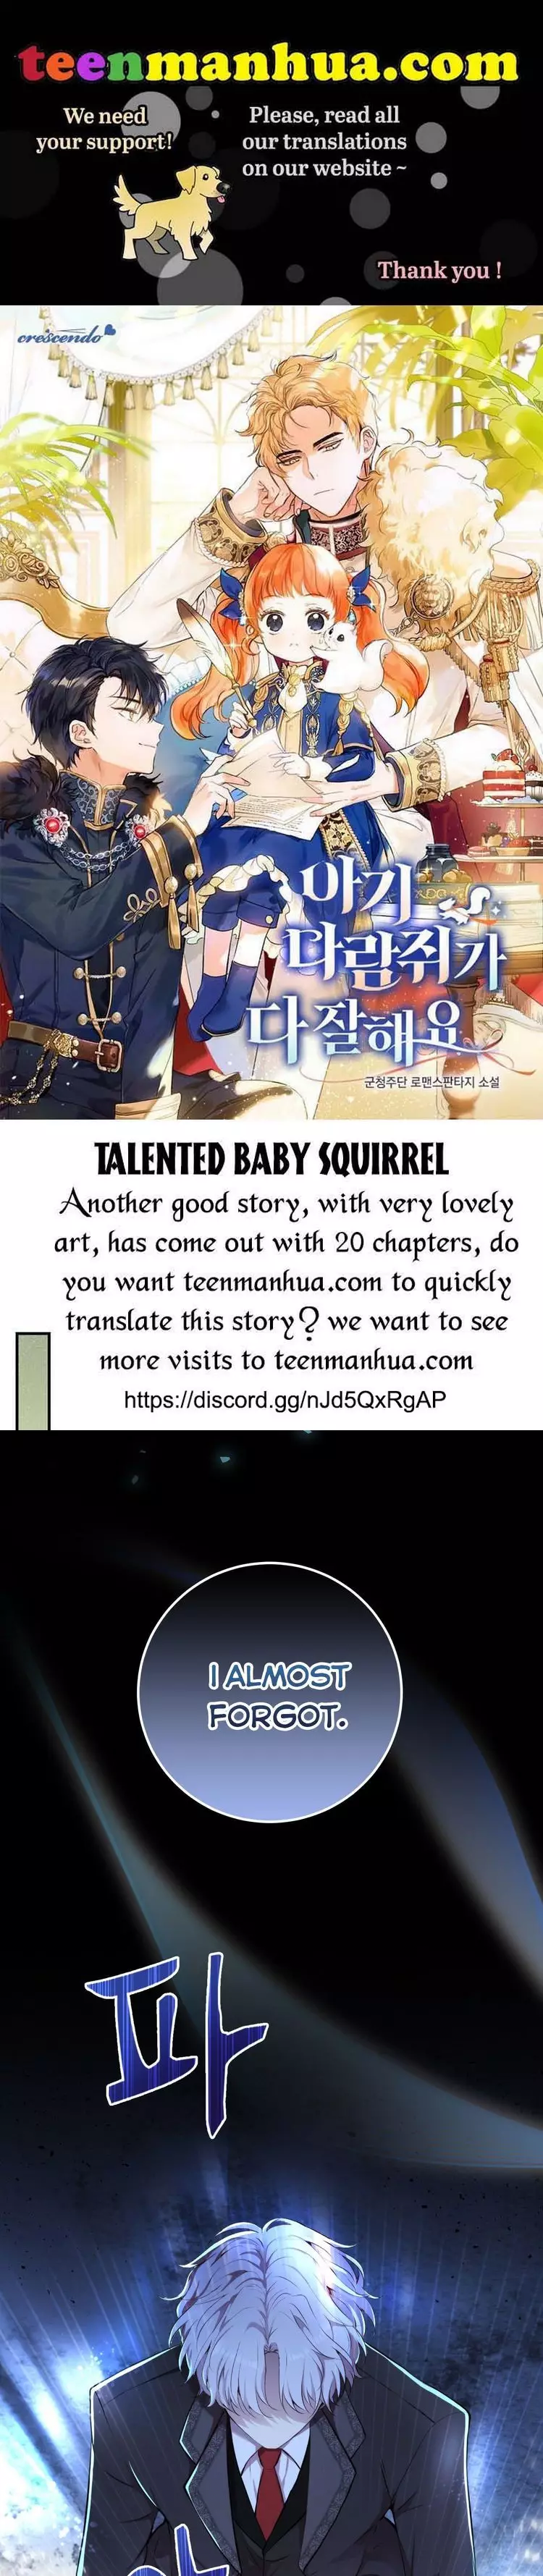 Talented Baby Squirrel - 2.05 page 1-83285c22